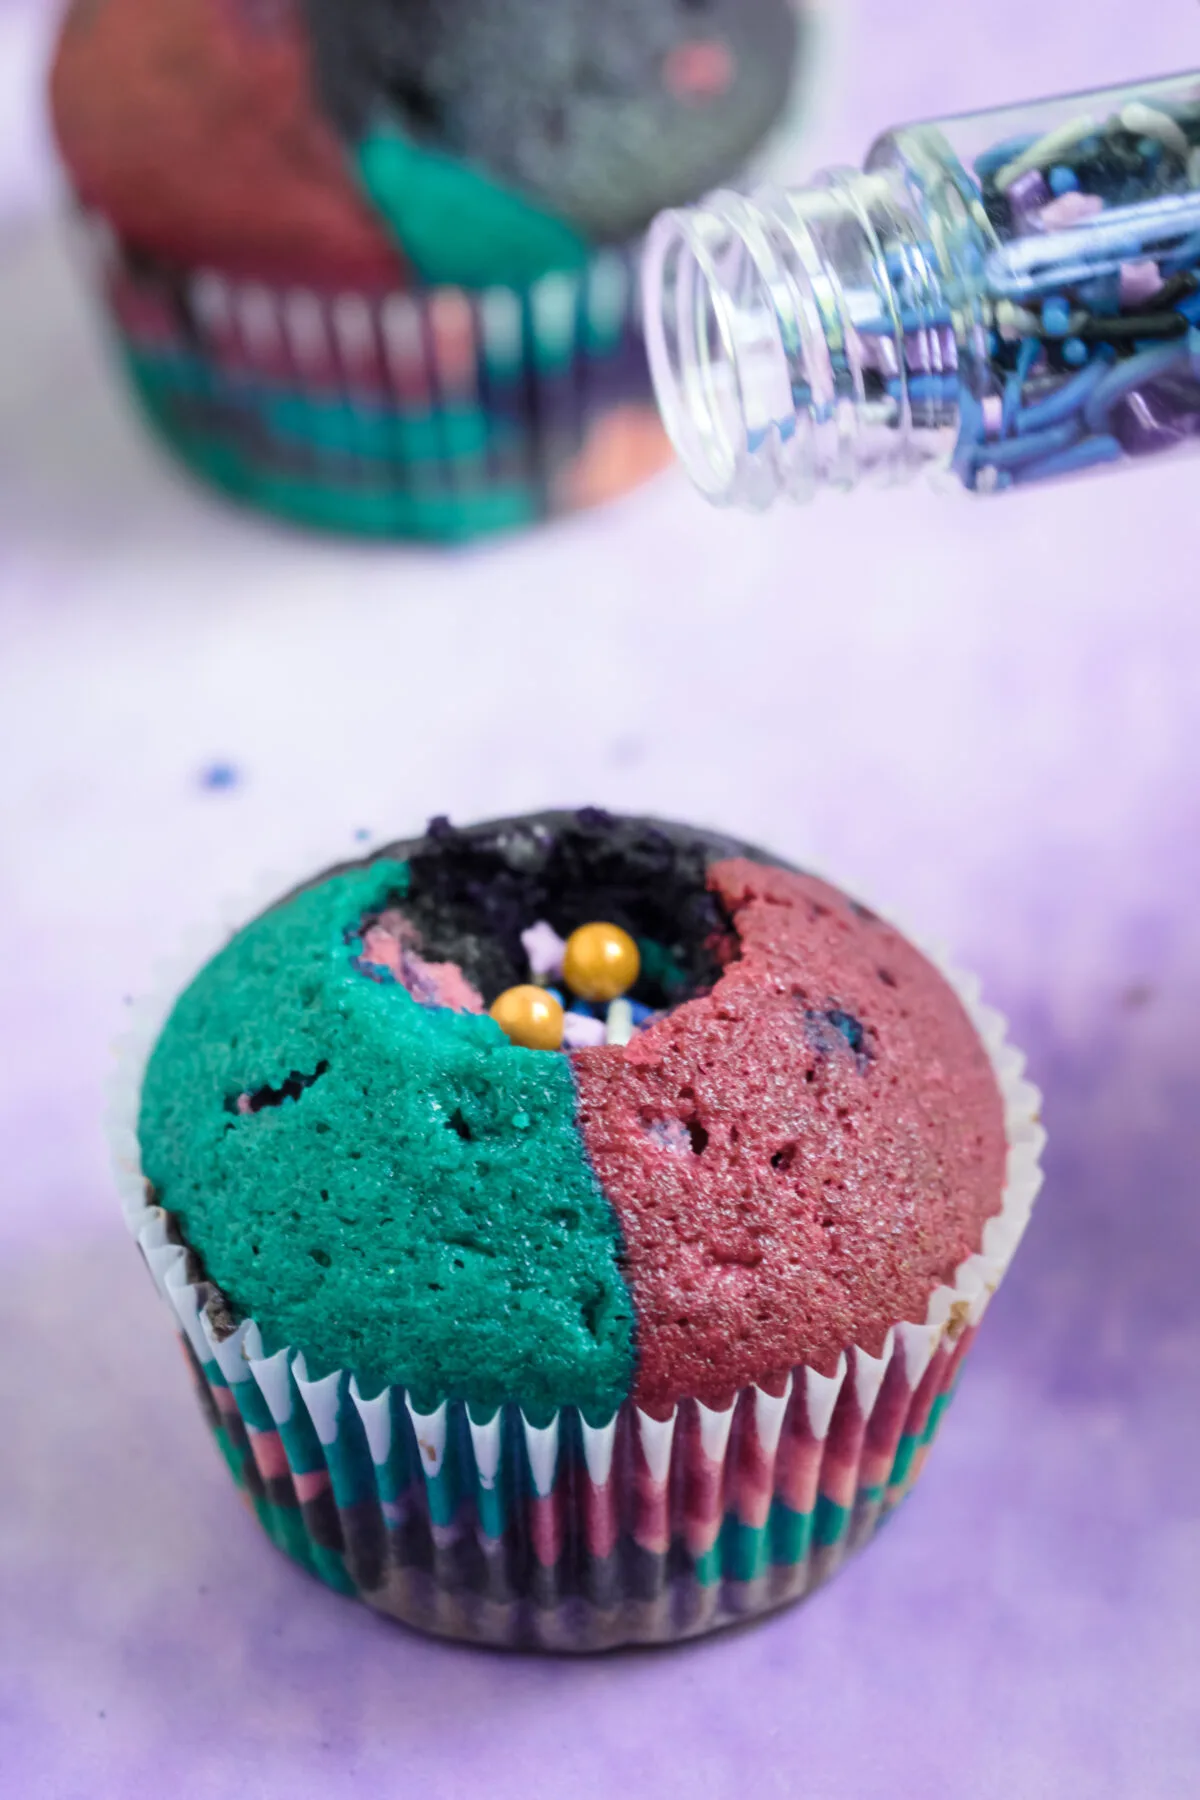 Filling the cupcake with sprinkles.